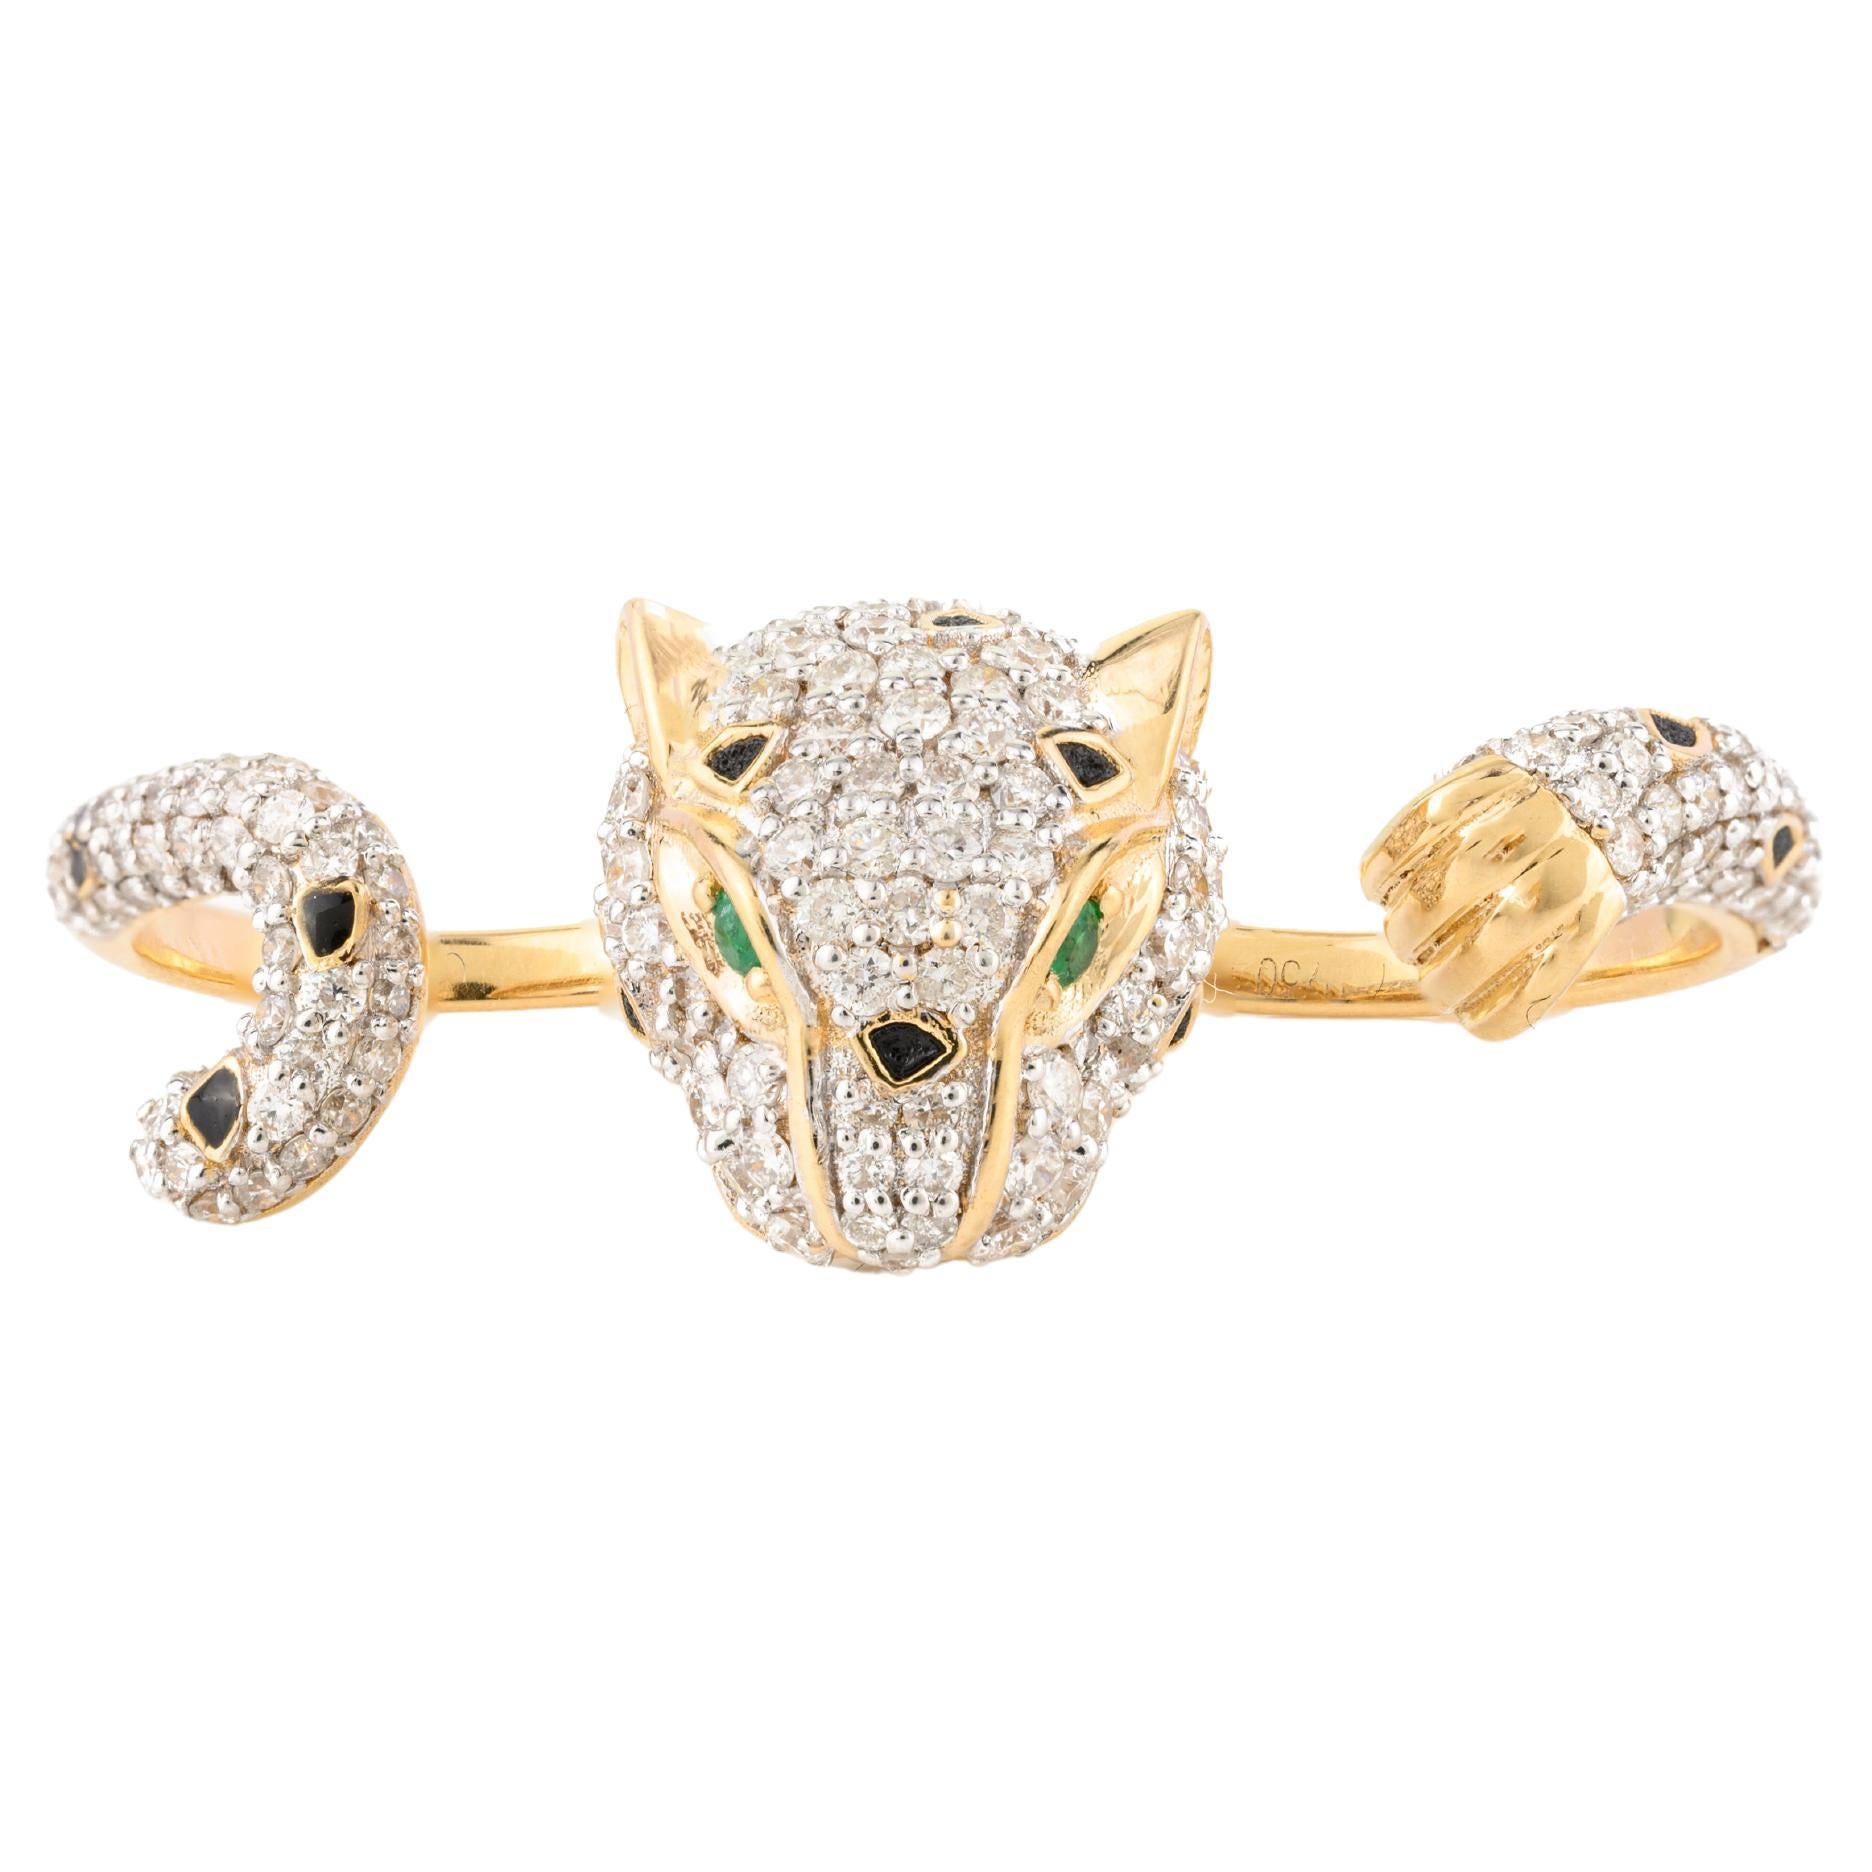 Statement 2.06 Carat Diamond Panther Double Finger Ring in 18k Yellow Gold